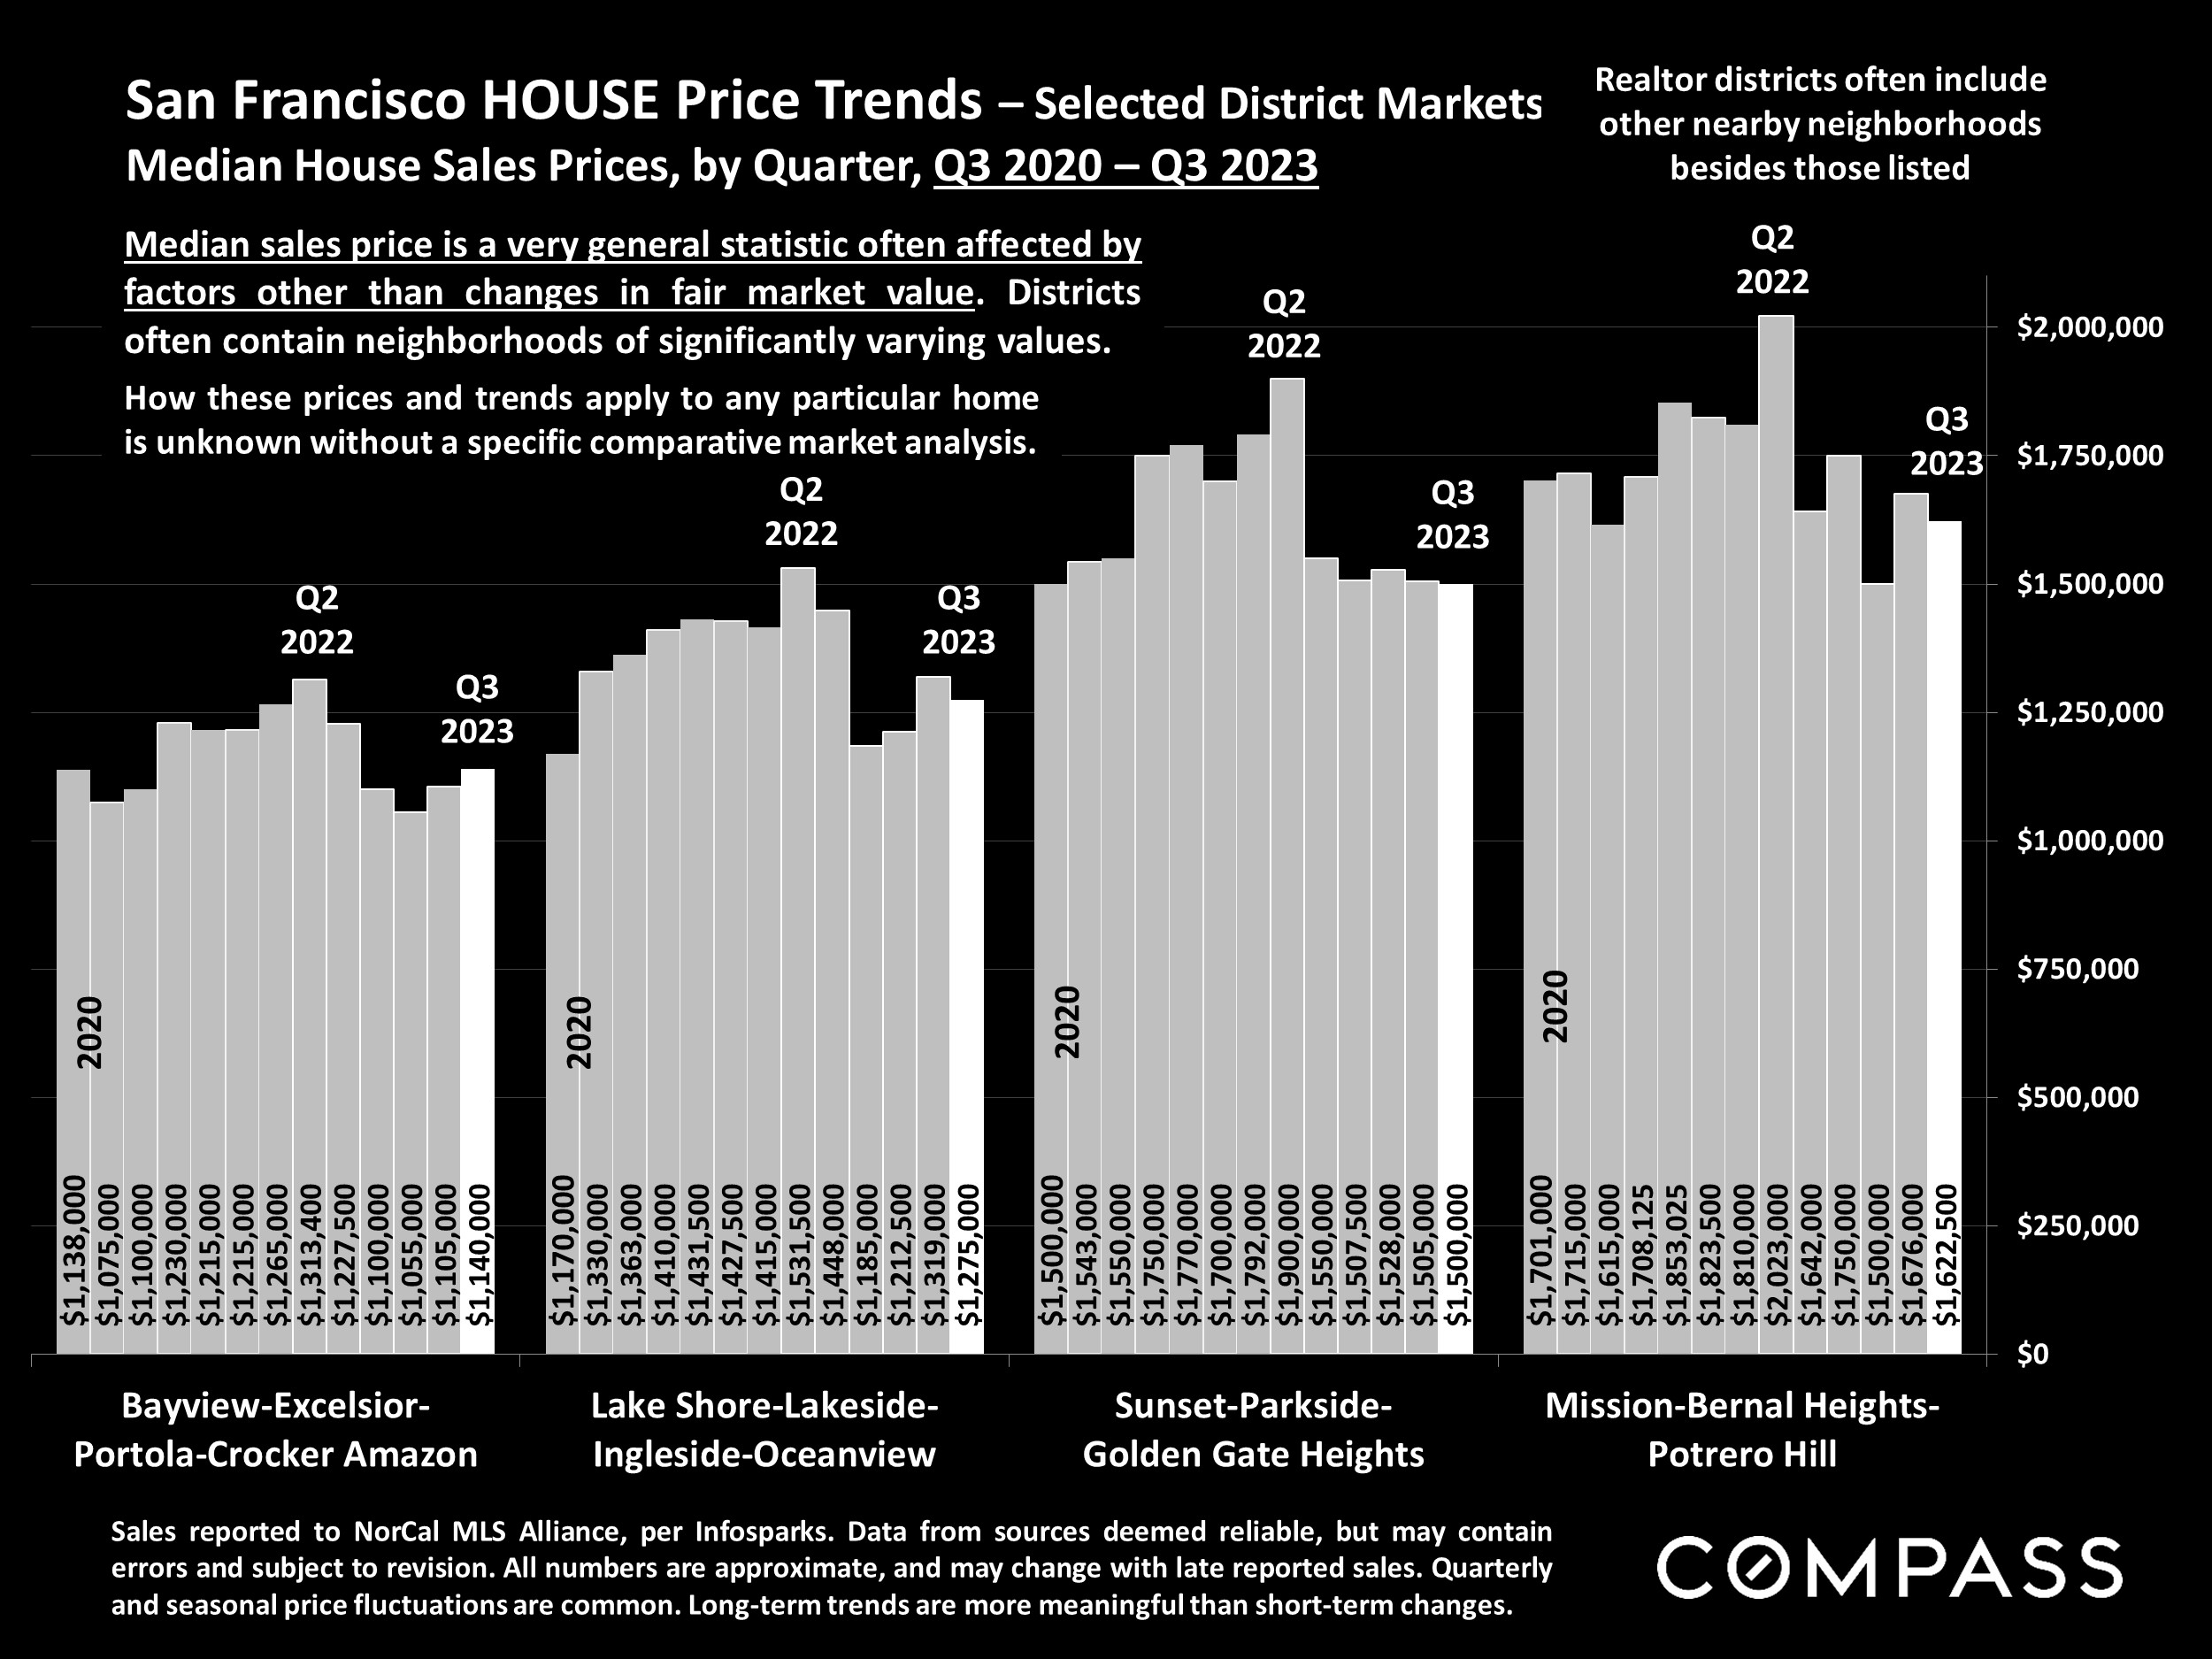 San Francisco HOUSE Price Trends - Selected District Markets Median House Sales Prices, by Quarter, Q3 2020 - Q3 2023